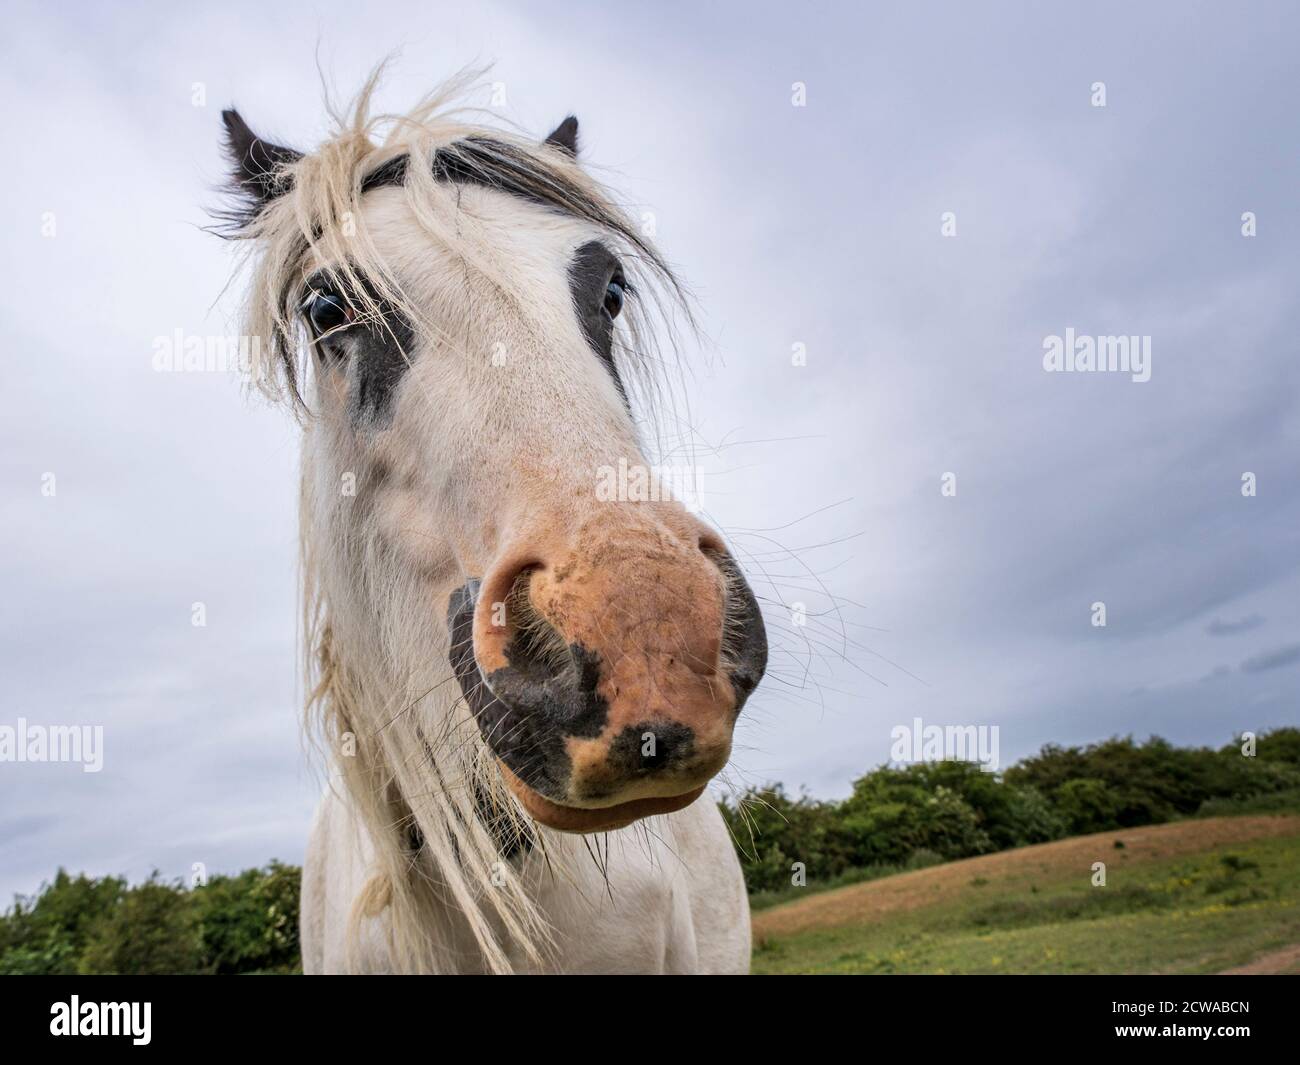 Wide angle close-up of the head of a horse in a field Stock Photo